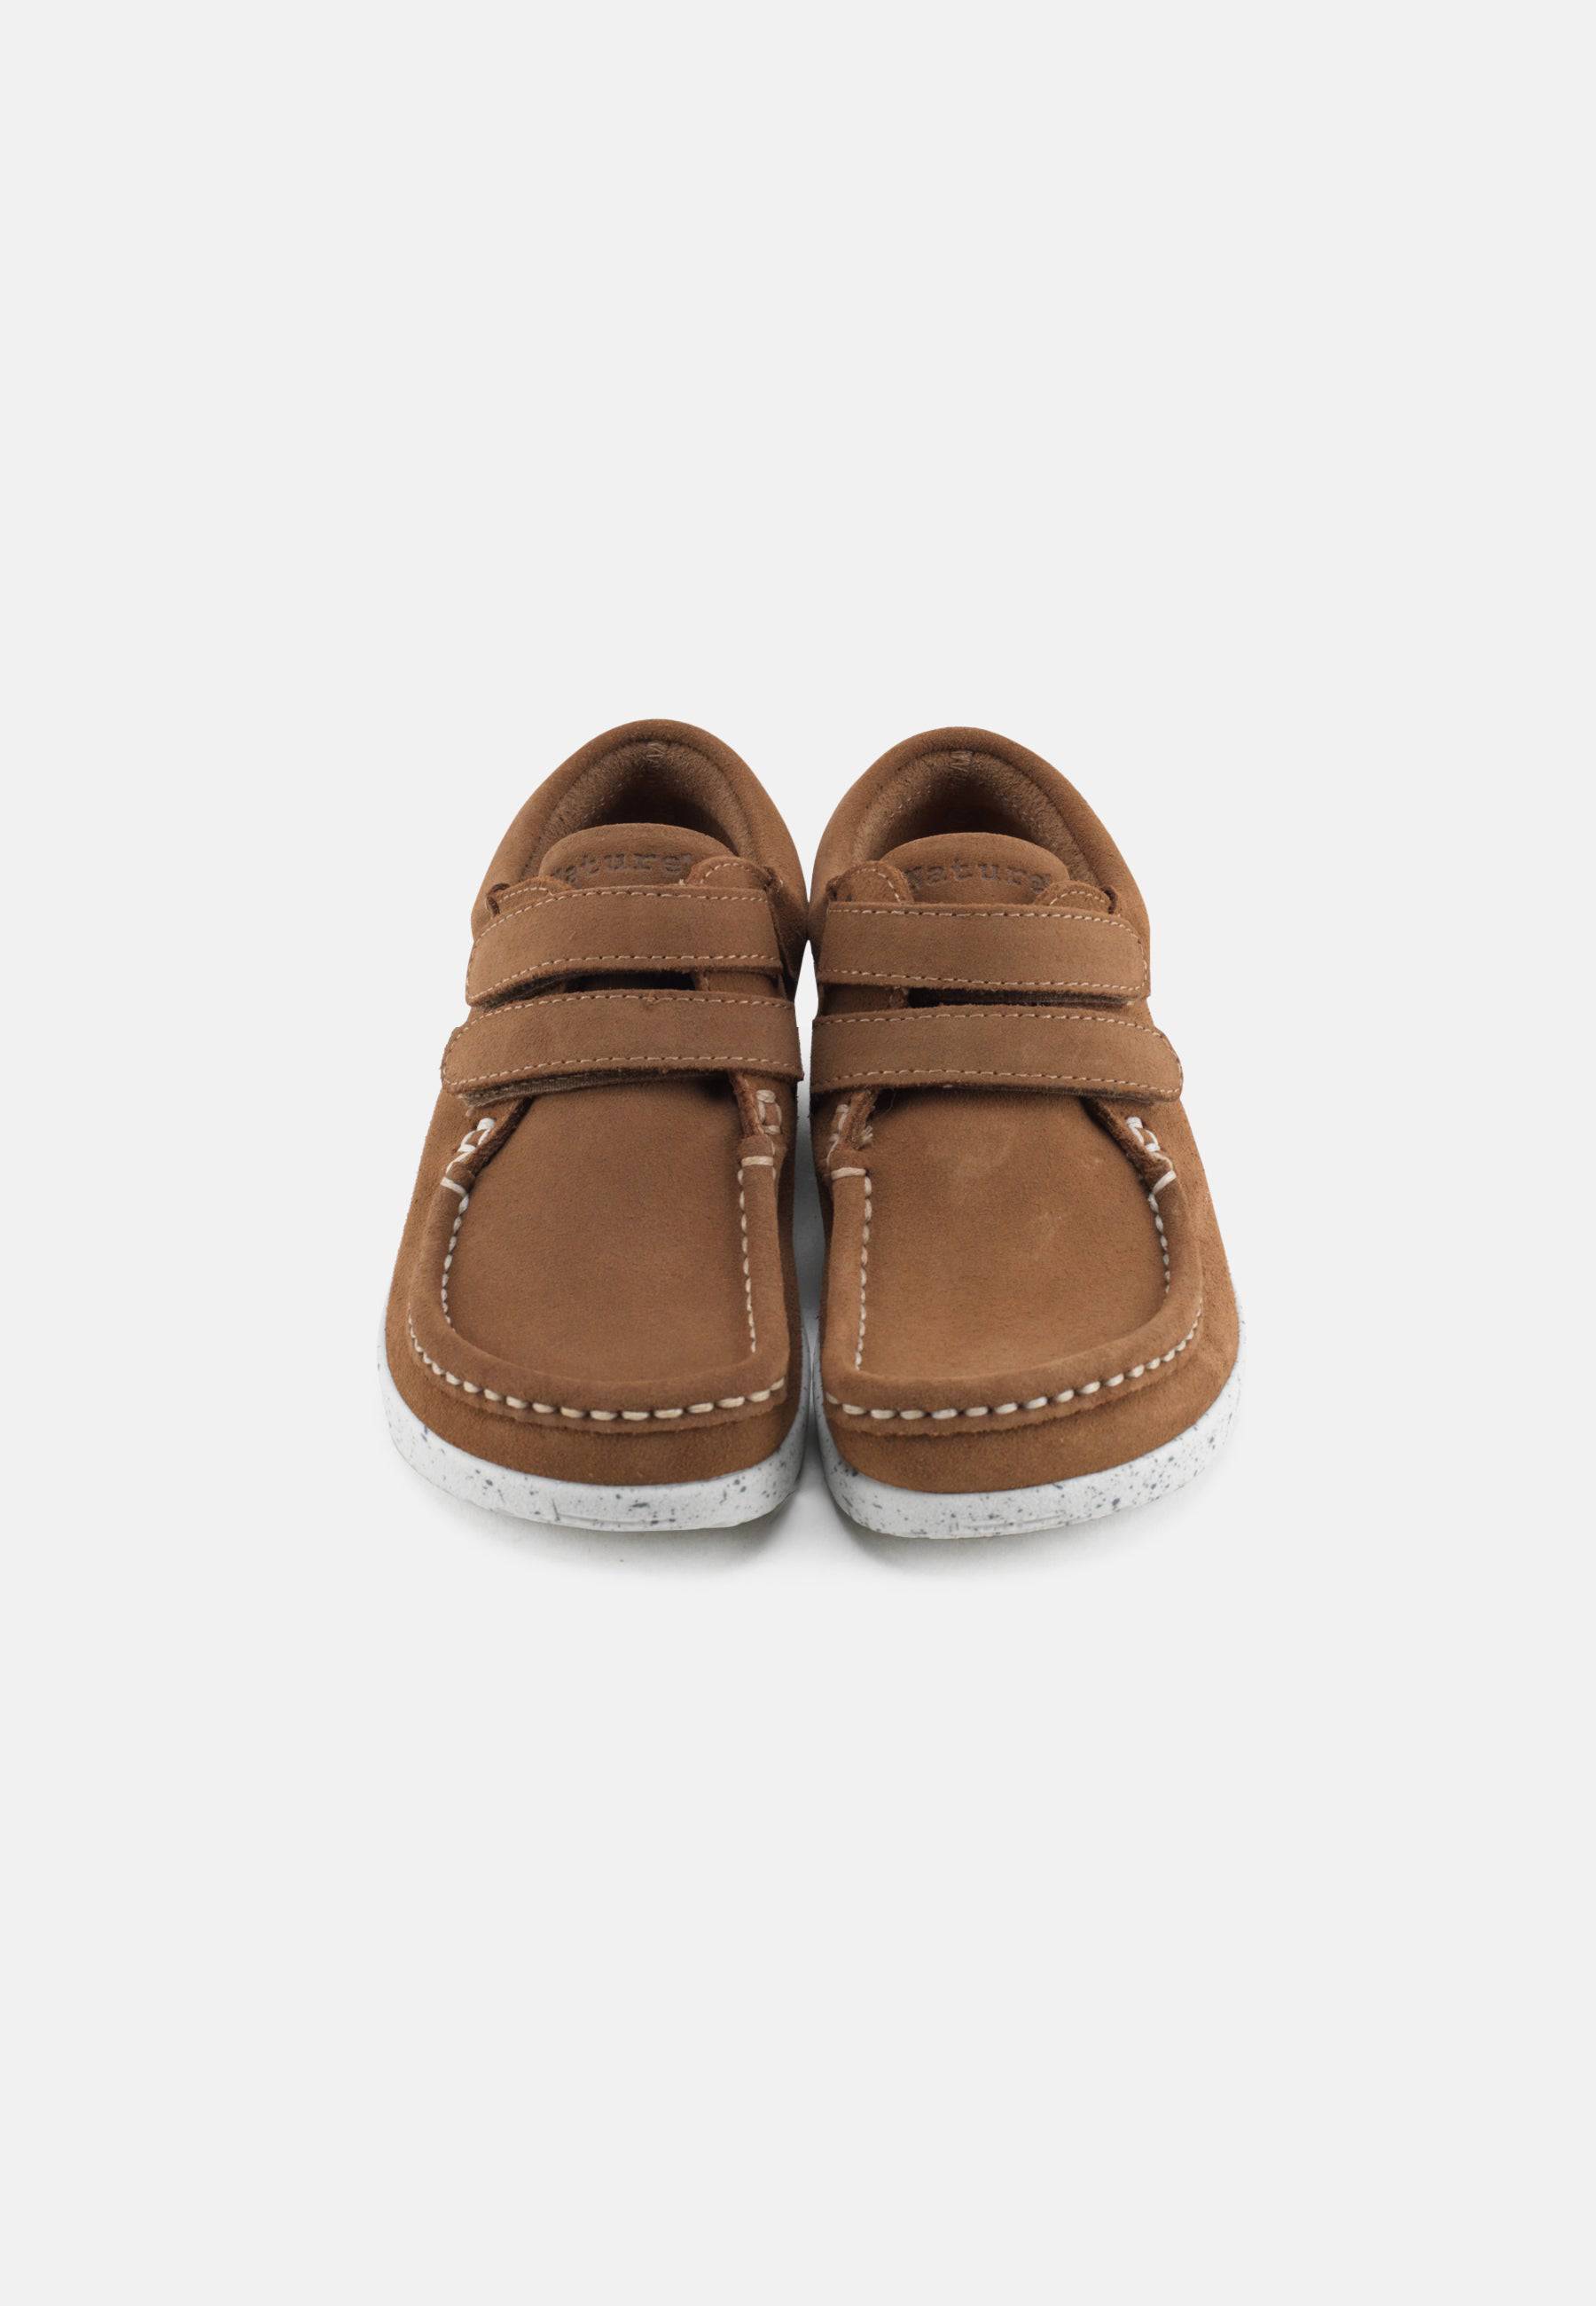 Ash Children's Shoes Suede - Toffee